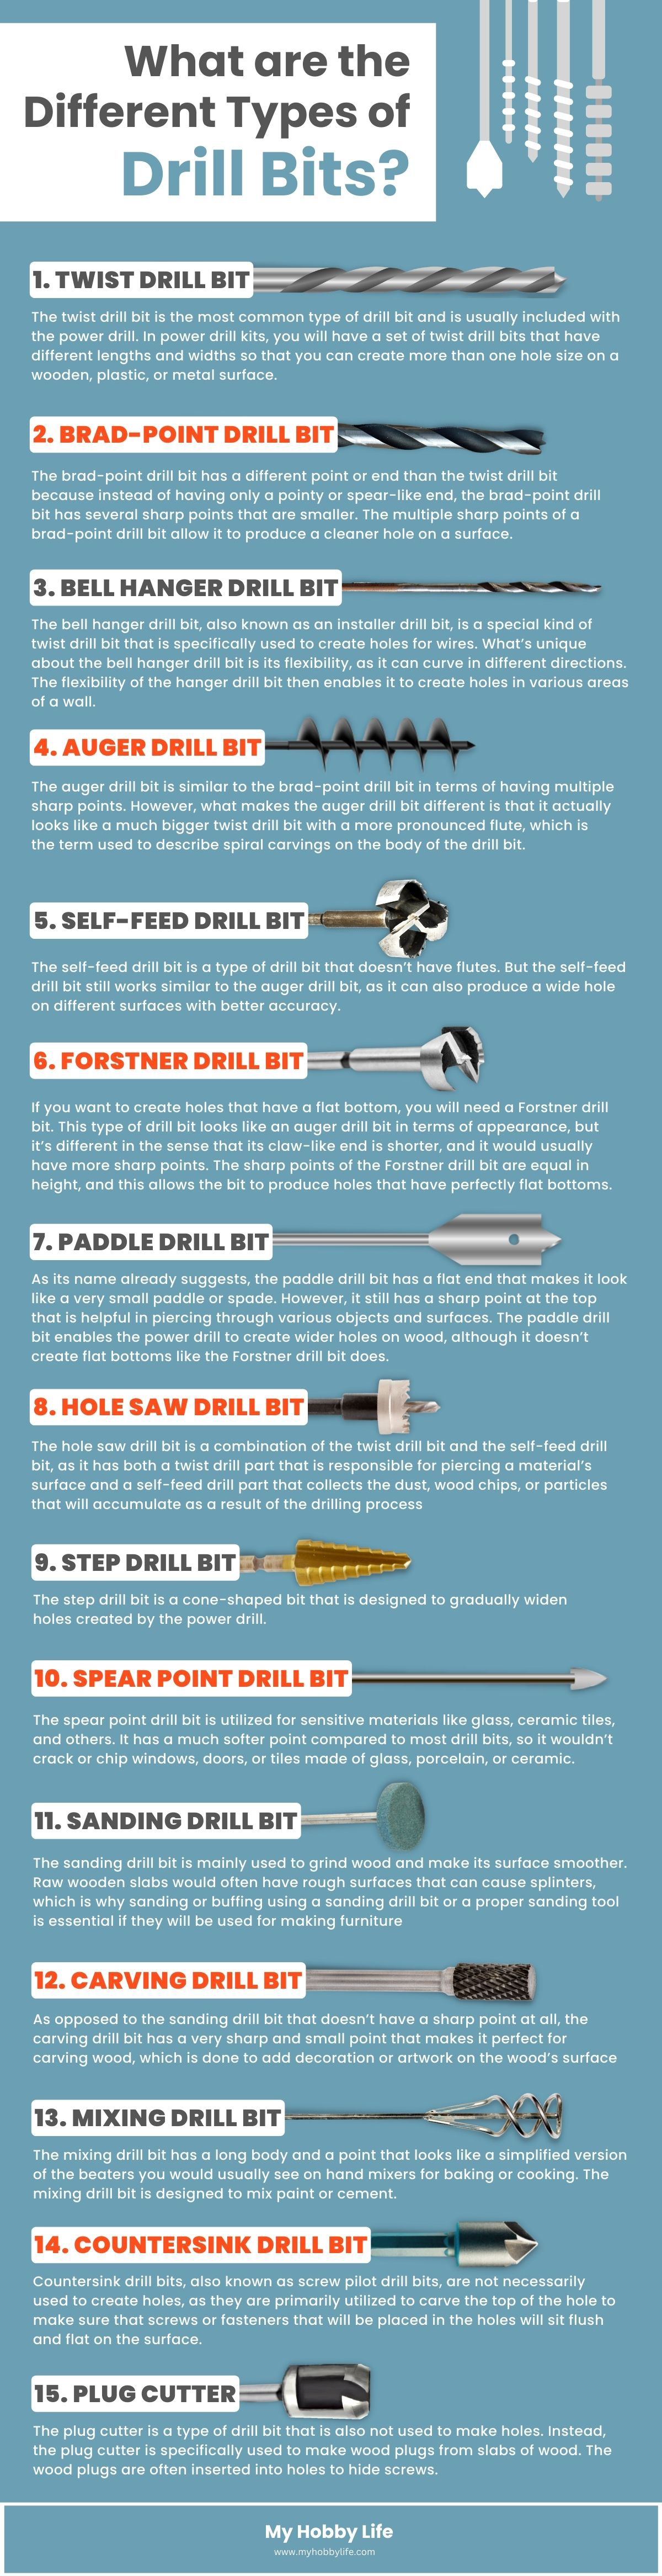 What are the Different Types of Power Drills?